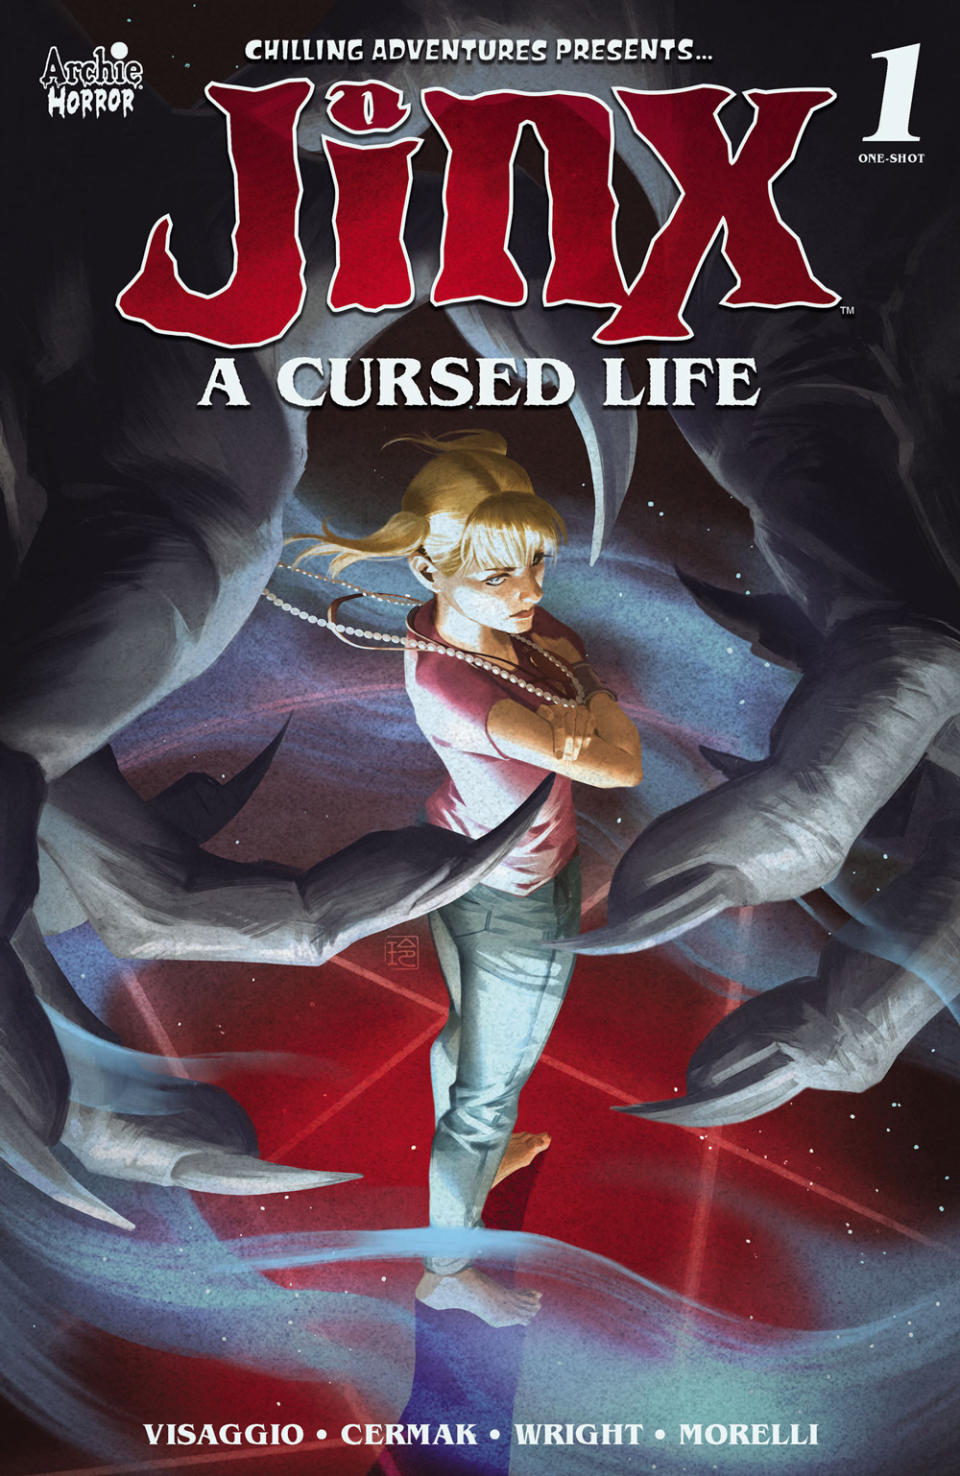 Covers for Jinx: A Cursed Life #1.